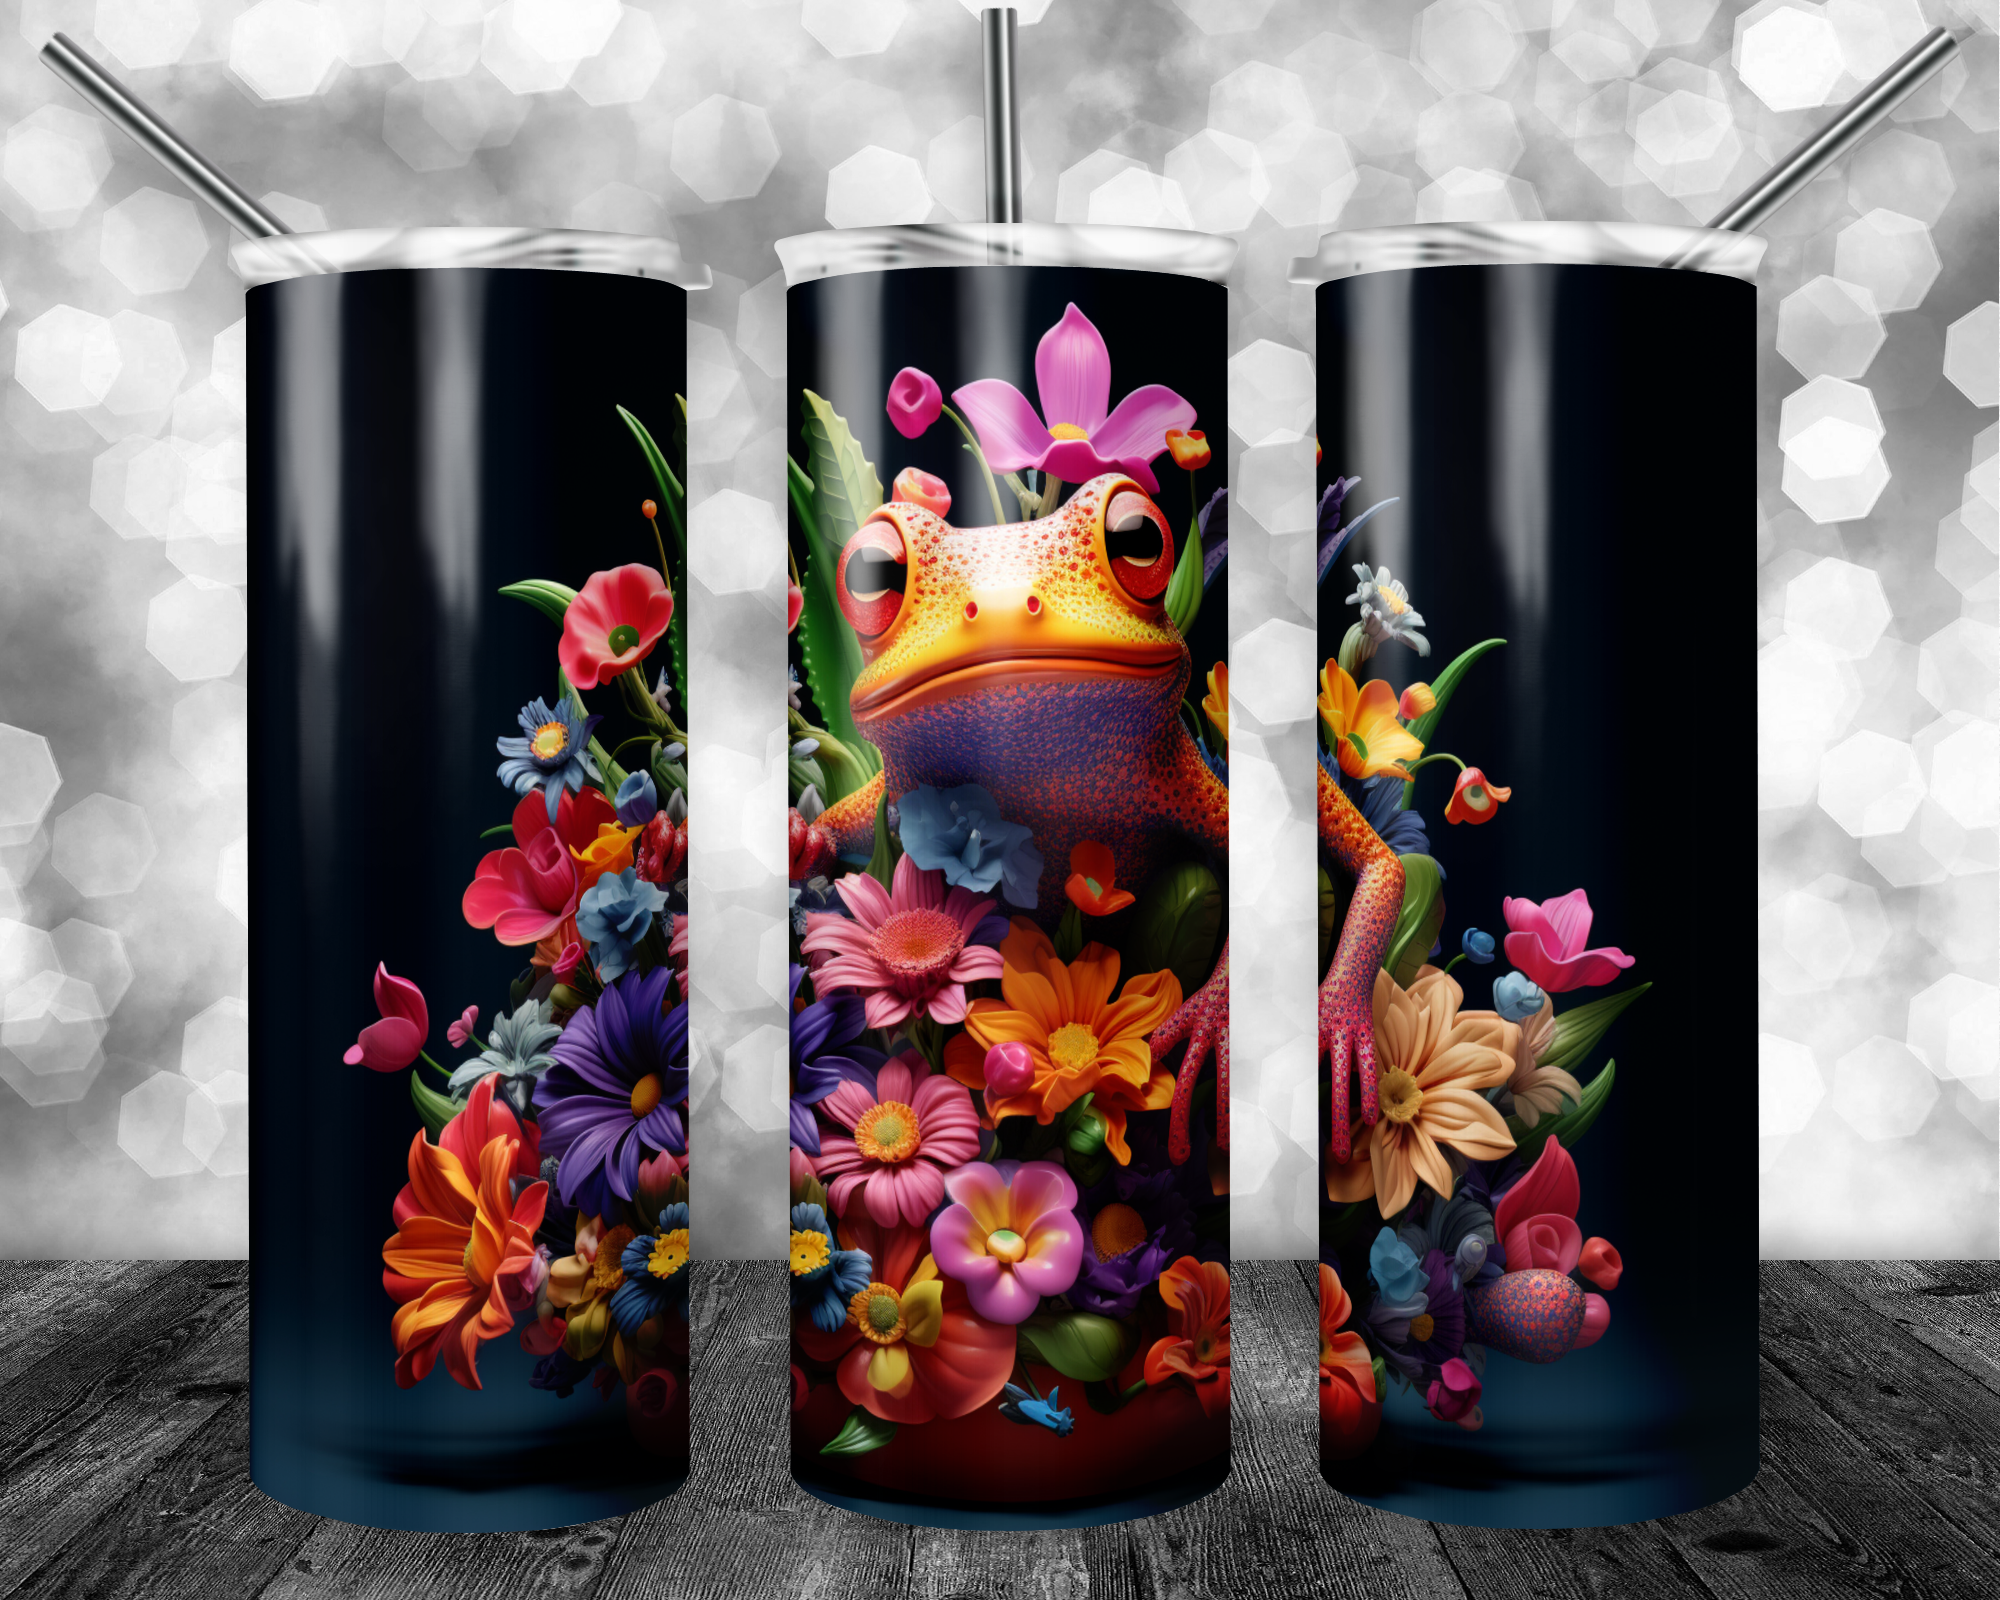 Curious frog stainless steel tumbler